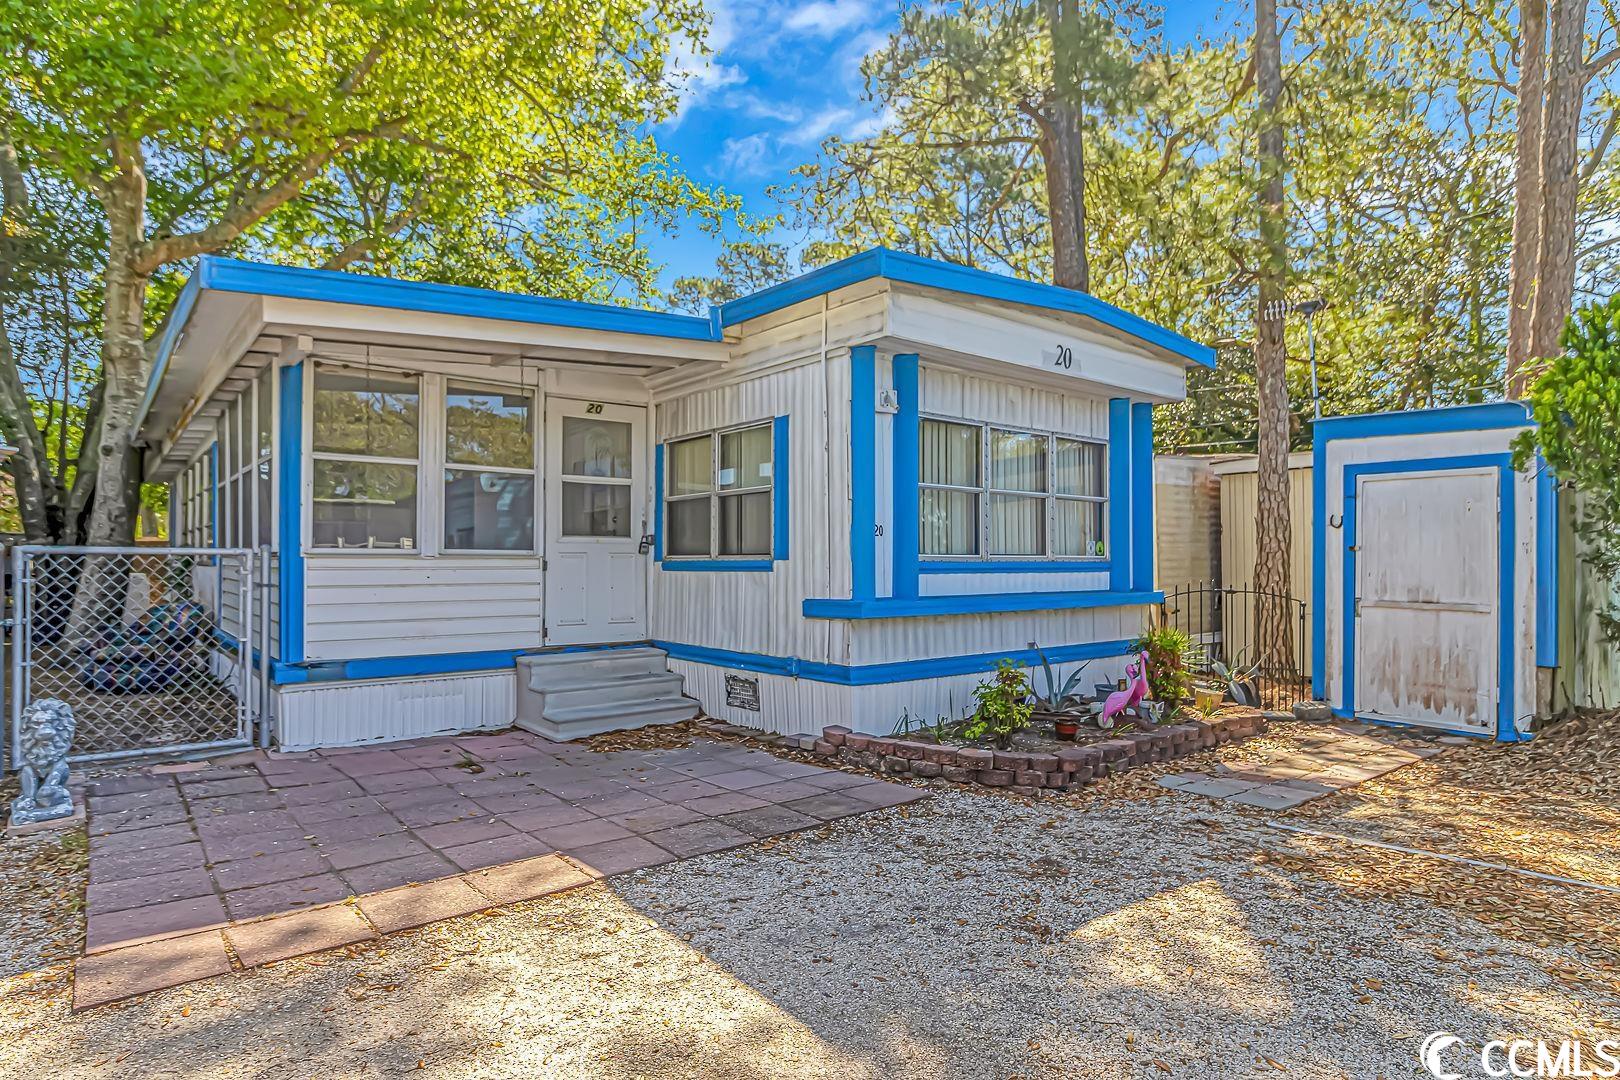 motivated seller. prime location, location, location, in the heart of north myrtle beach, east of hwy 17!!! this charming 2 bedroom/1 bathroom manufactured home on leased land is centrally located in the windy hill section of north myrtle beach. open the door to a tiled carolina room, then enter the property to an open concept living/dining/kitchen and fresh paint throughout. washer and dryer convey and are within the home. close to barefoot landing, restaurants & steps to the beach. lot lease includes: water, trash, sewer, cable & lawn maintenance. great vacation home, primary residence or rental property! won't last long, schedule a showing appointment today! all measurements are not guaranteed, buyer responsible for verifying.